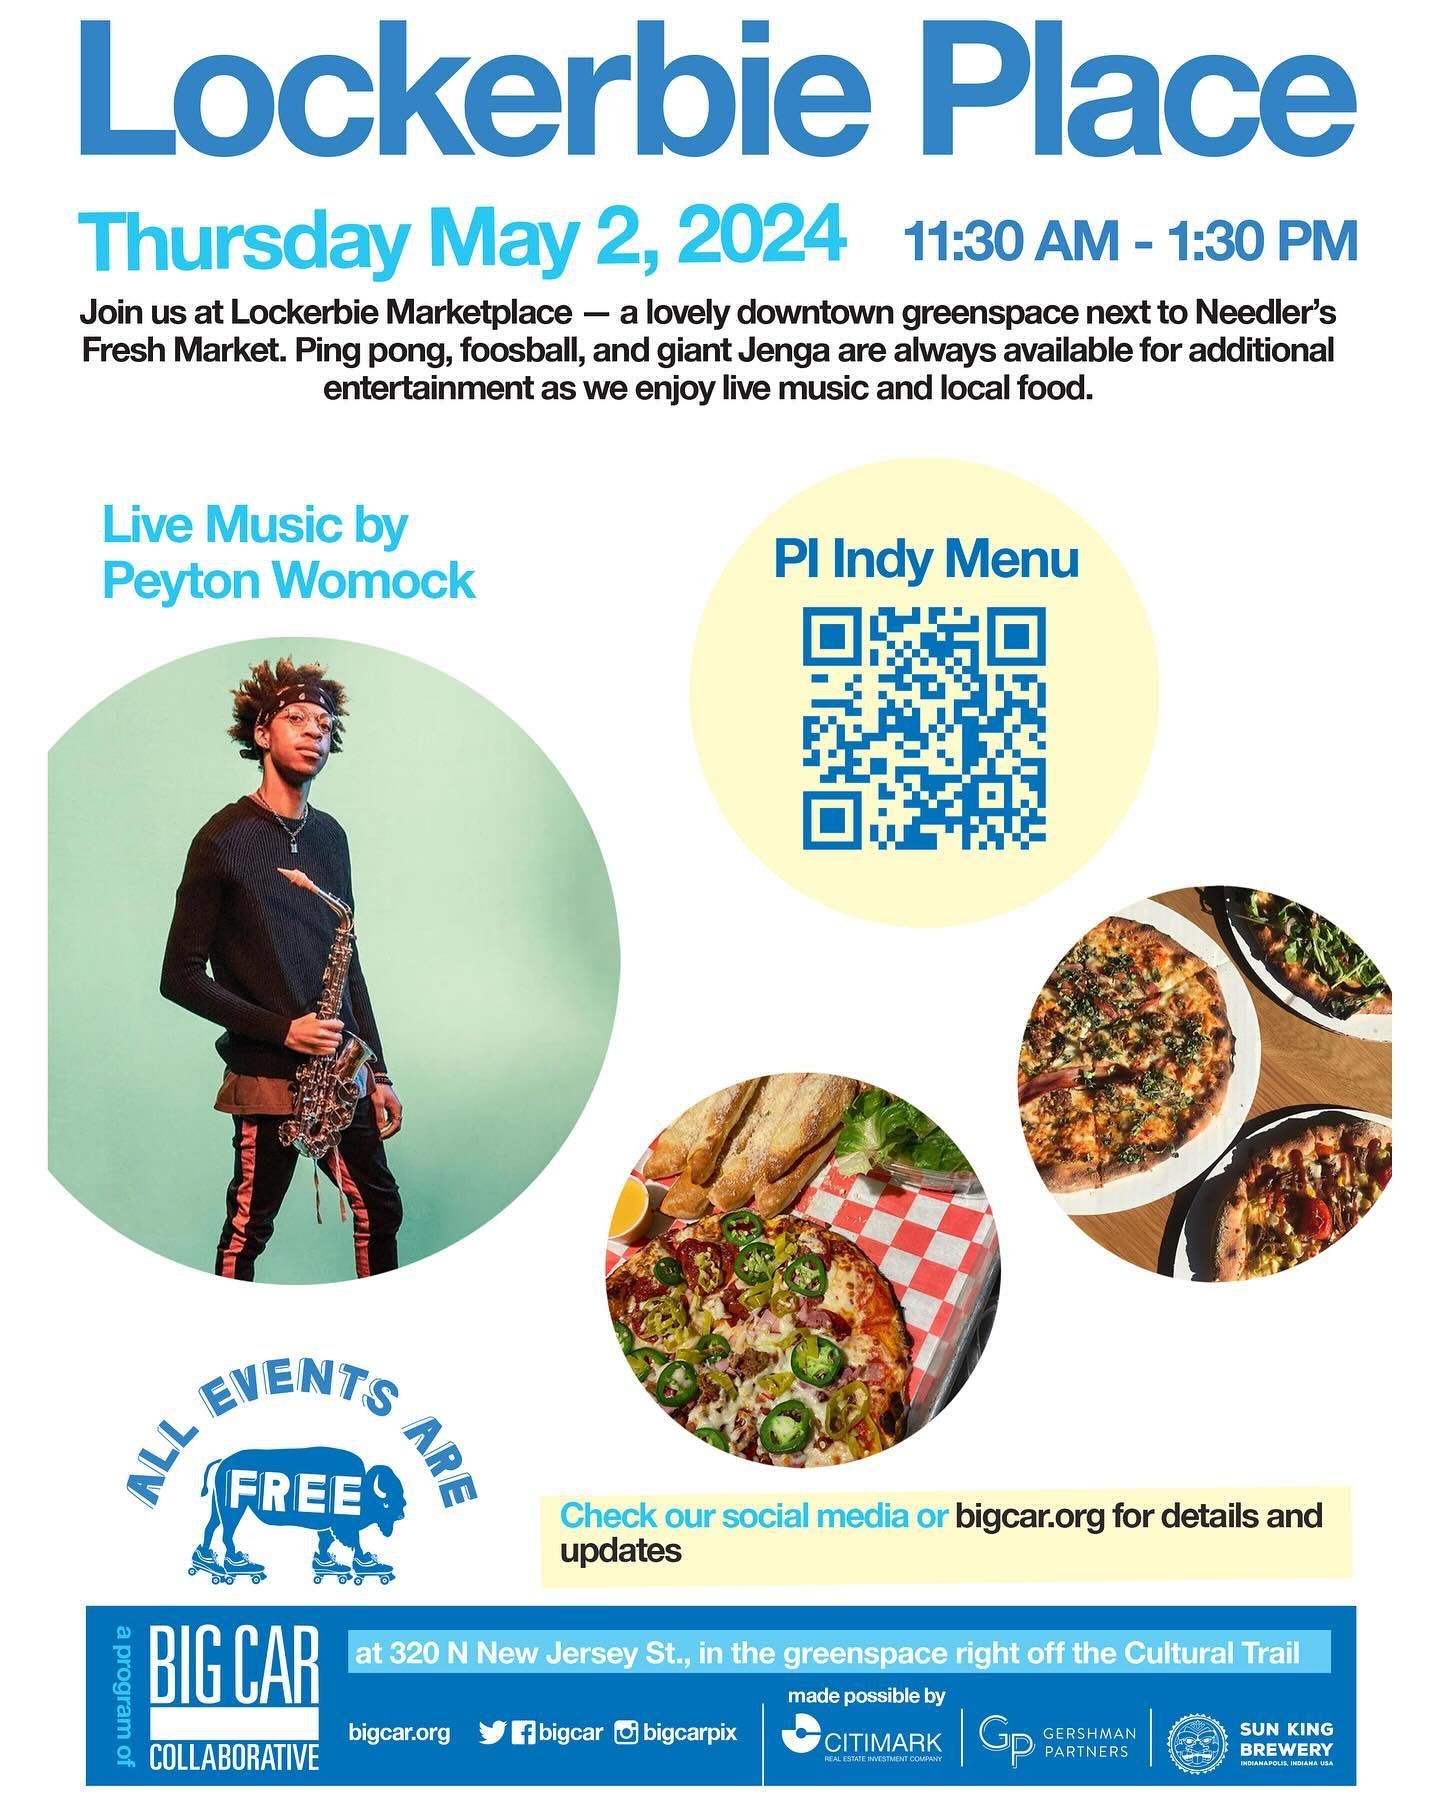 Check out the lineup for Lockerbie Place for Thursday, May 2! 🌟

From 11:30 a.m. to 1:30 p.m.,

 🎶 Live music by Peyton Womock
🍕  Food from vendor Pi Indy

And, as always,

🏓  Pingpong, foosball, &amp; giant Jenga
🌱  Relaxing greenspace

All eve